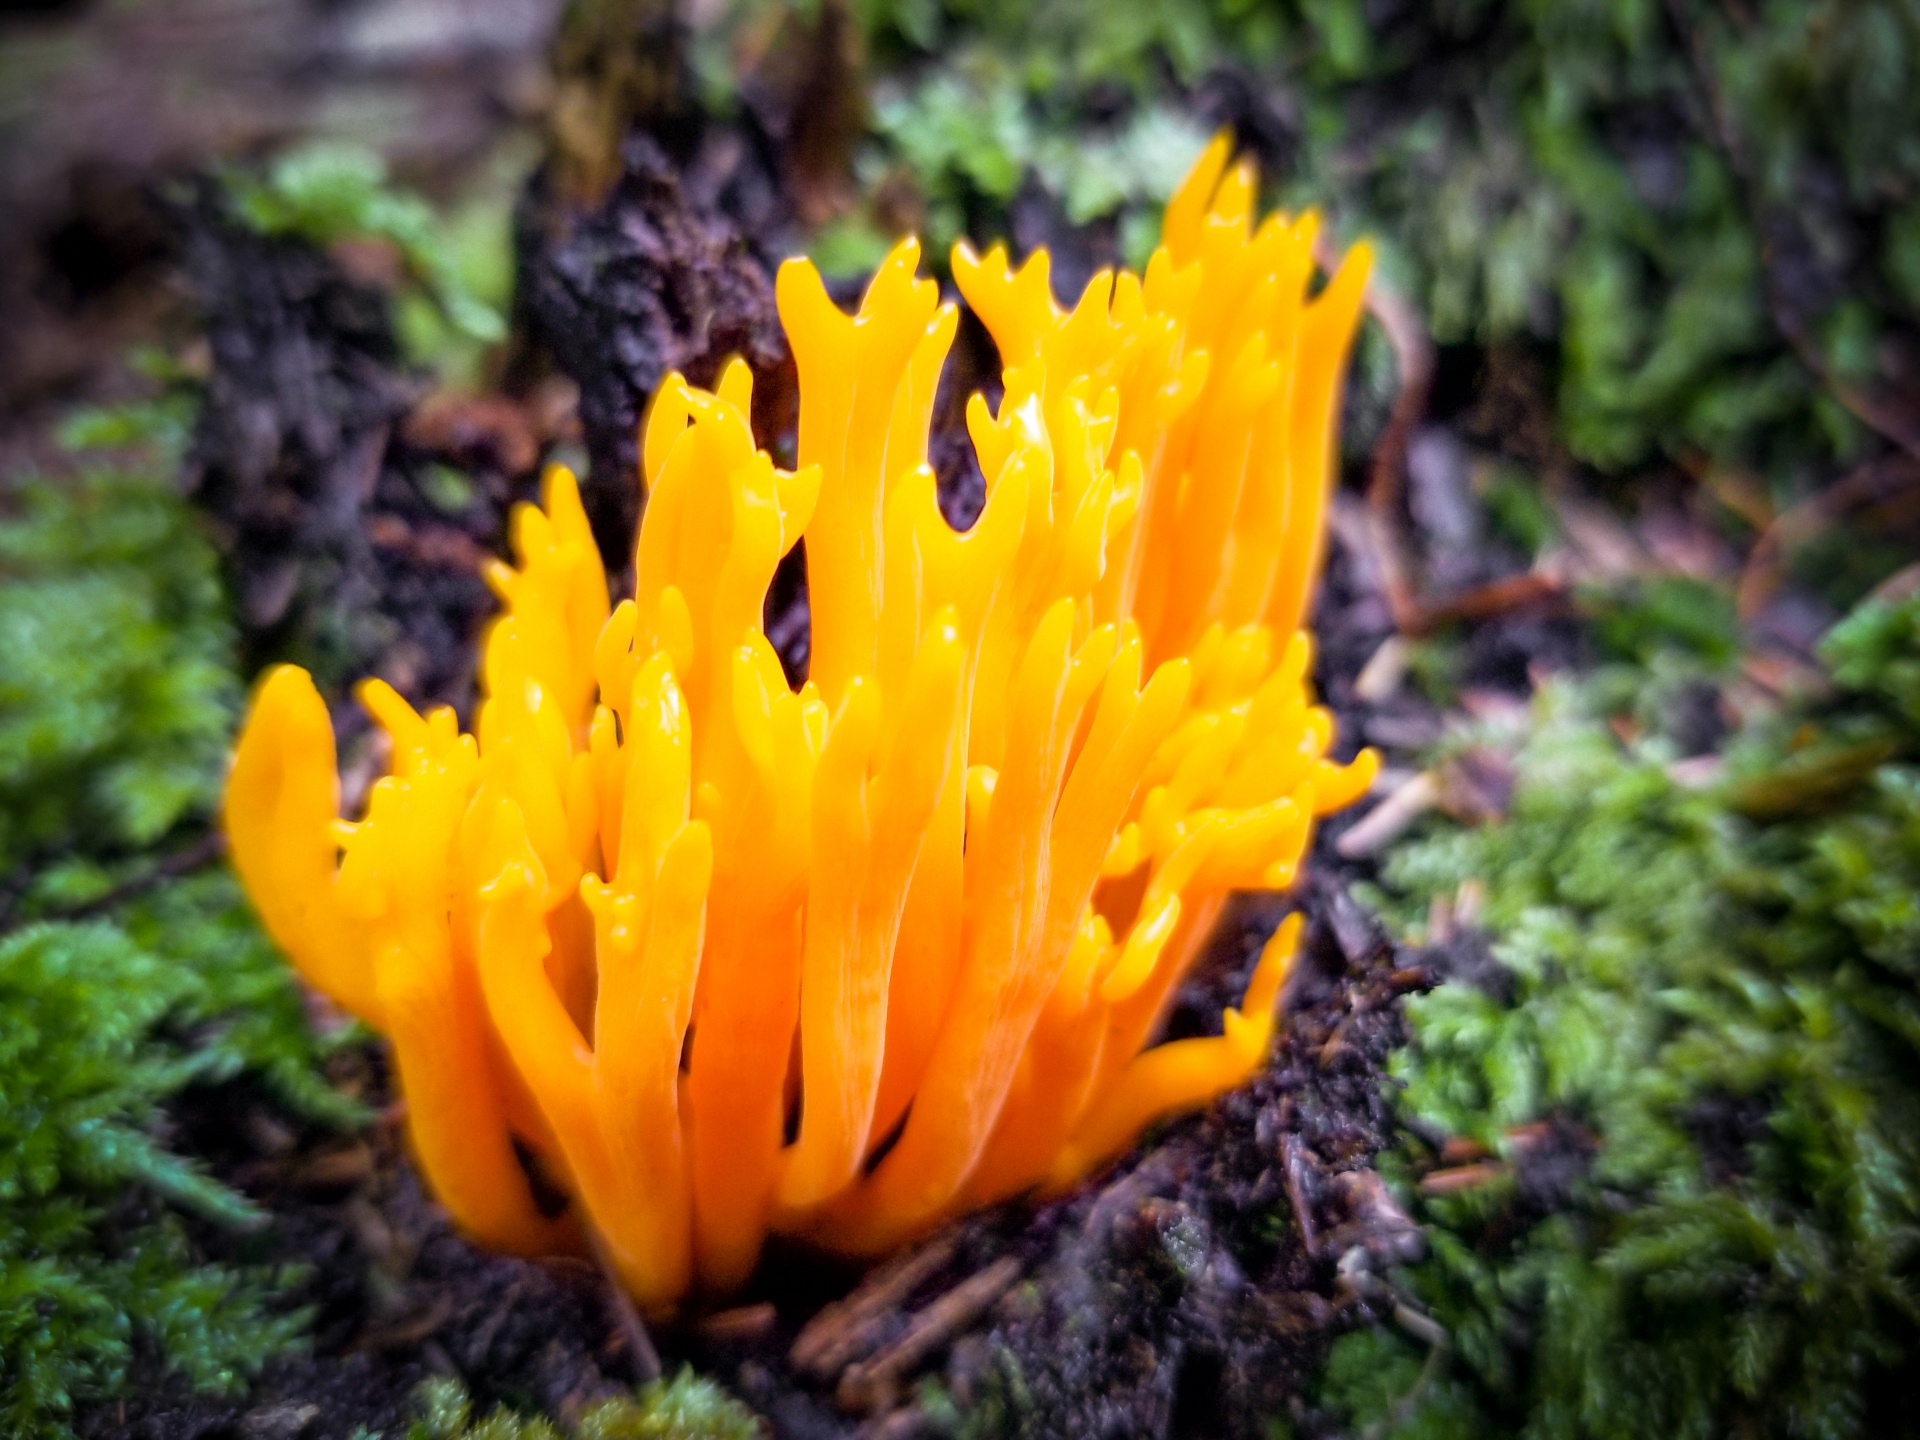 Wild yellow mushroom growing in a forest